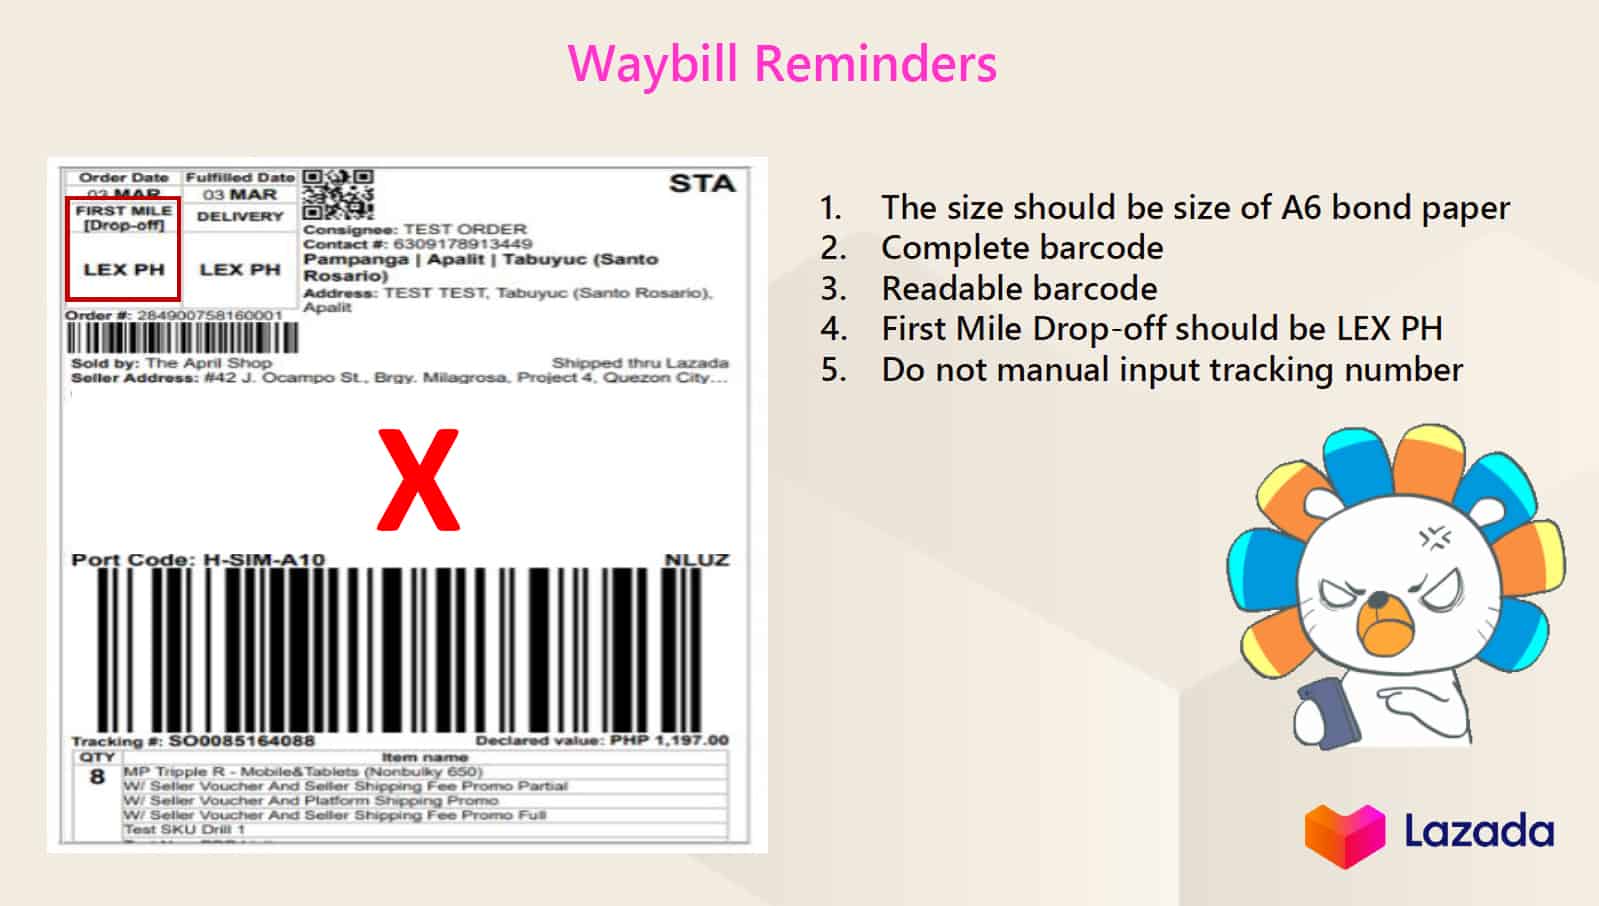 laszada drop off waybill reminder from grandson travel and tours